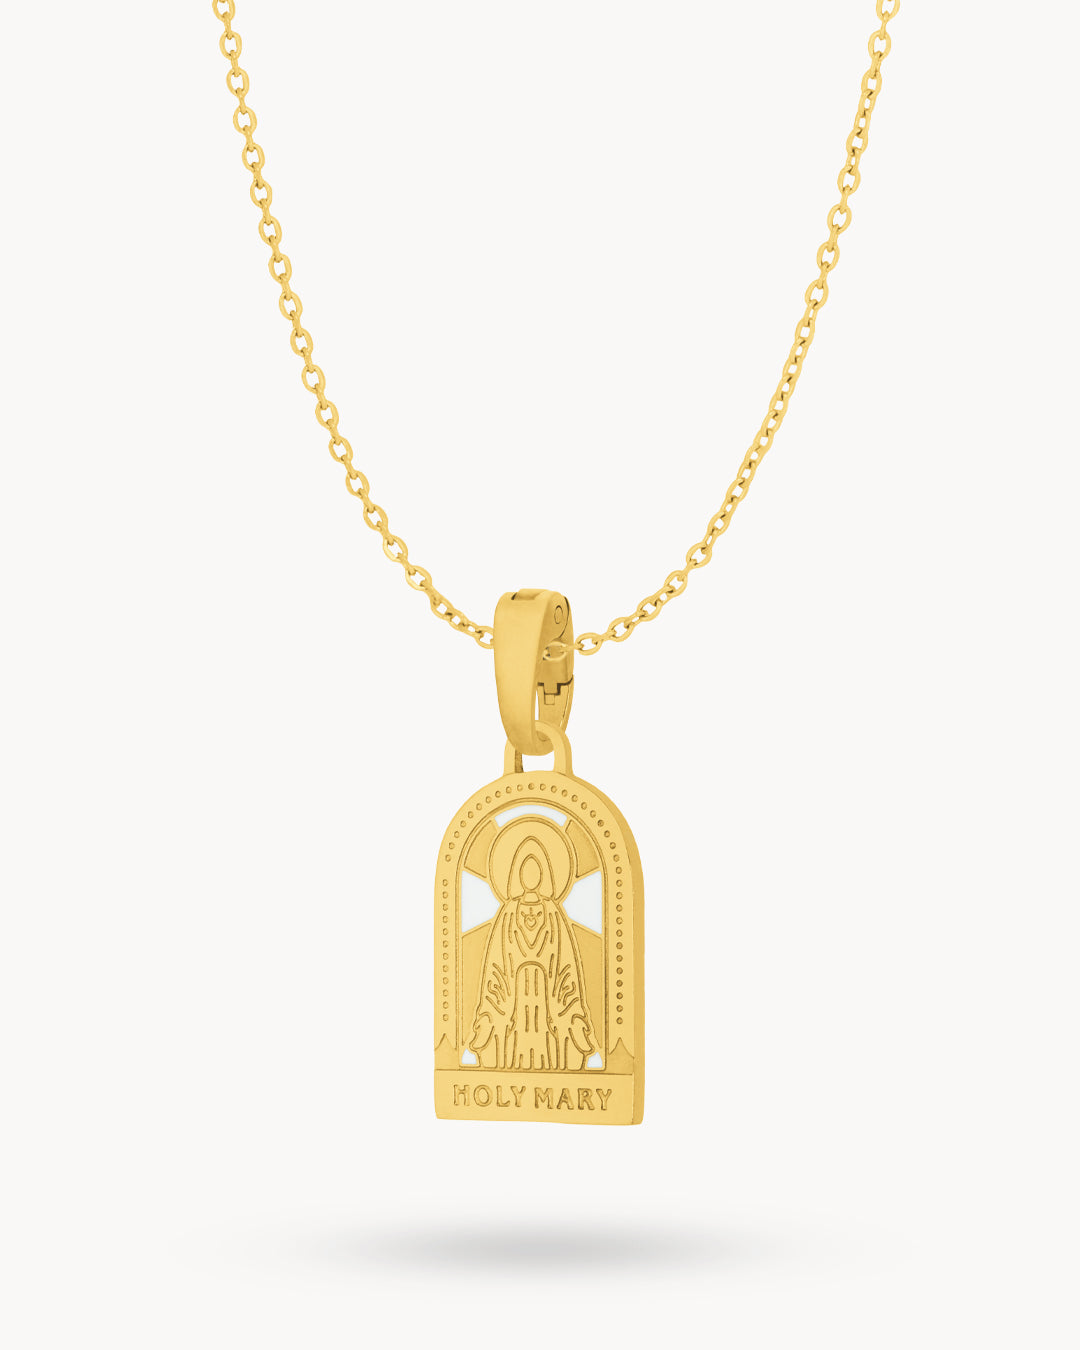 Holy Mary Necklace Set, Gold